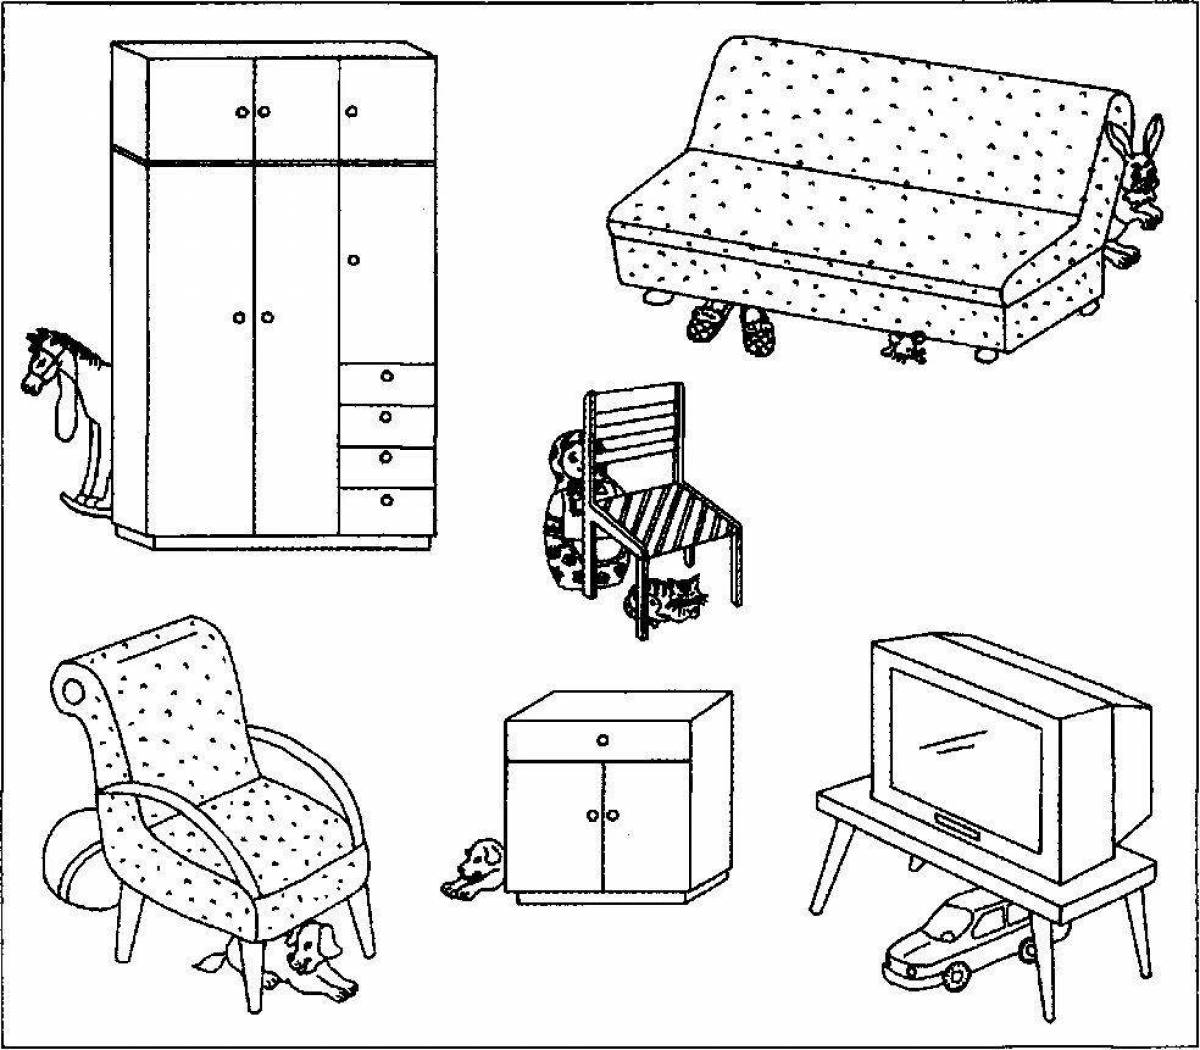 Fun furniture coloring for the elderly